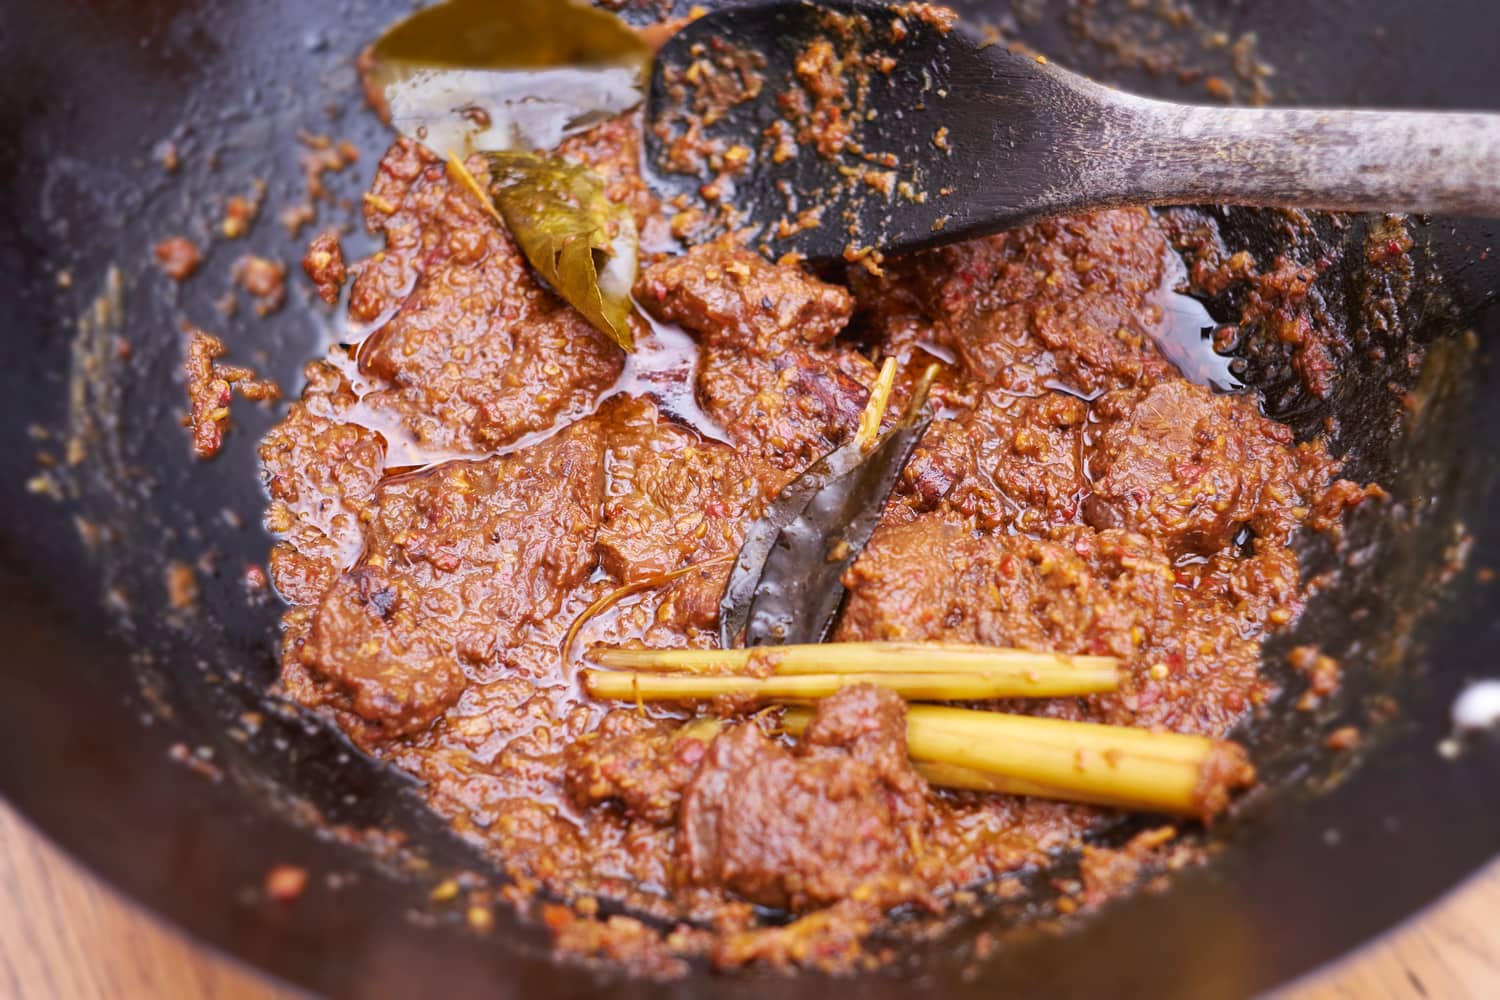 Beef Rendang, almost ready